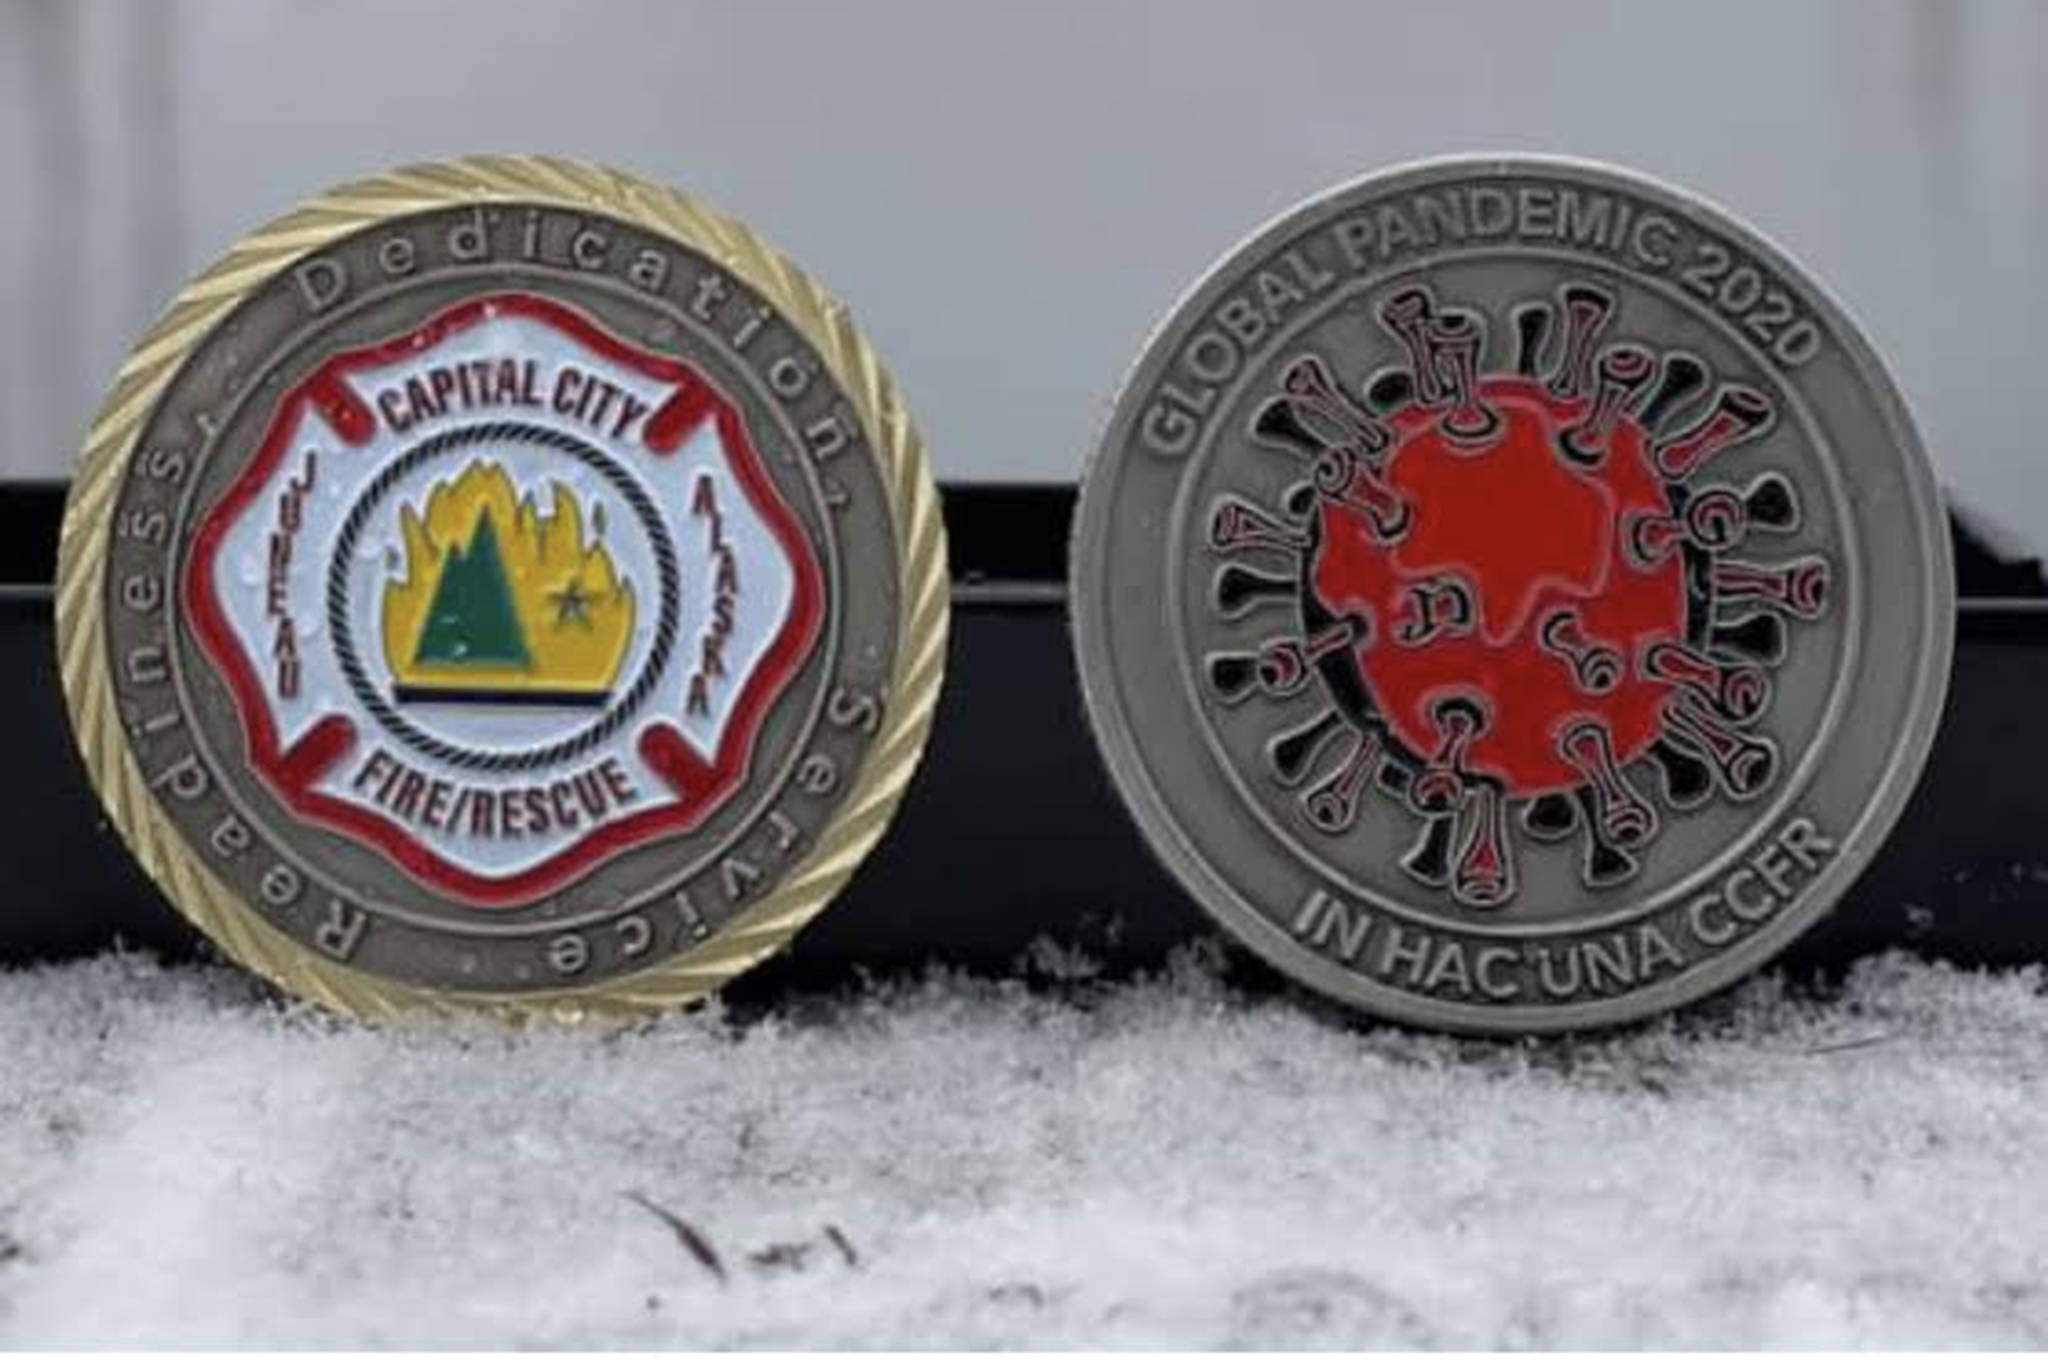 Capital City Fire/Rescue recently distributed challenge coins as a thank you to the emergency workers and staff who assisted with COVID-19 testing at the Juneau International Airport from March 2020 until Jan. 31. On Feb. 1, state contractor Capstone took over airport testing. (Courtesy Photo/City and Borough of Juneau)